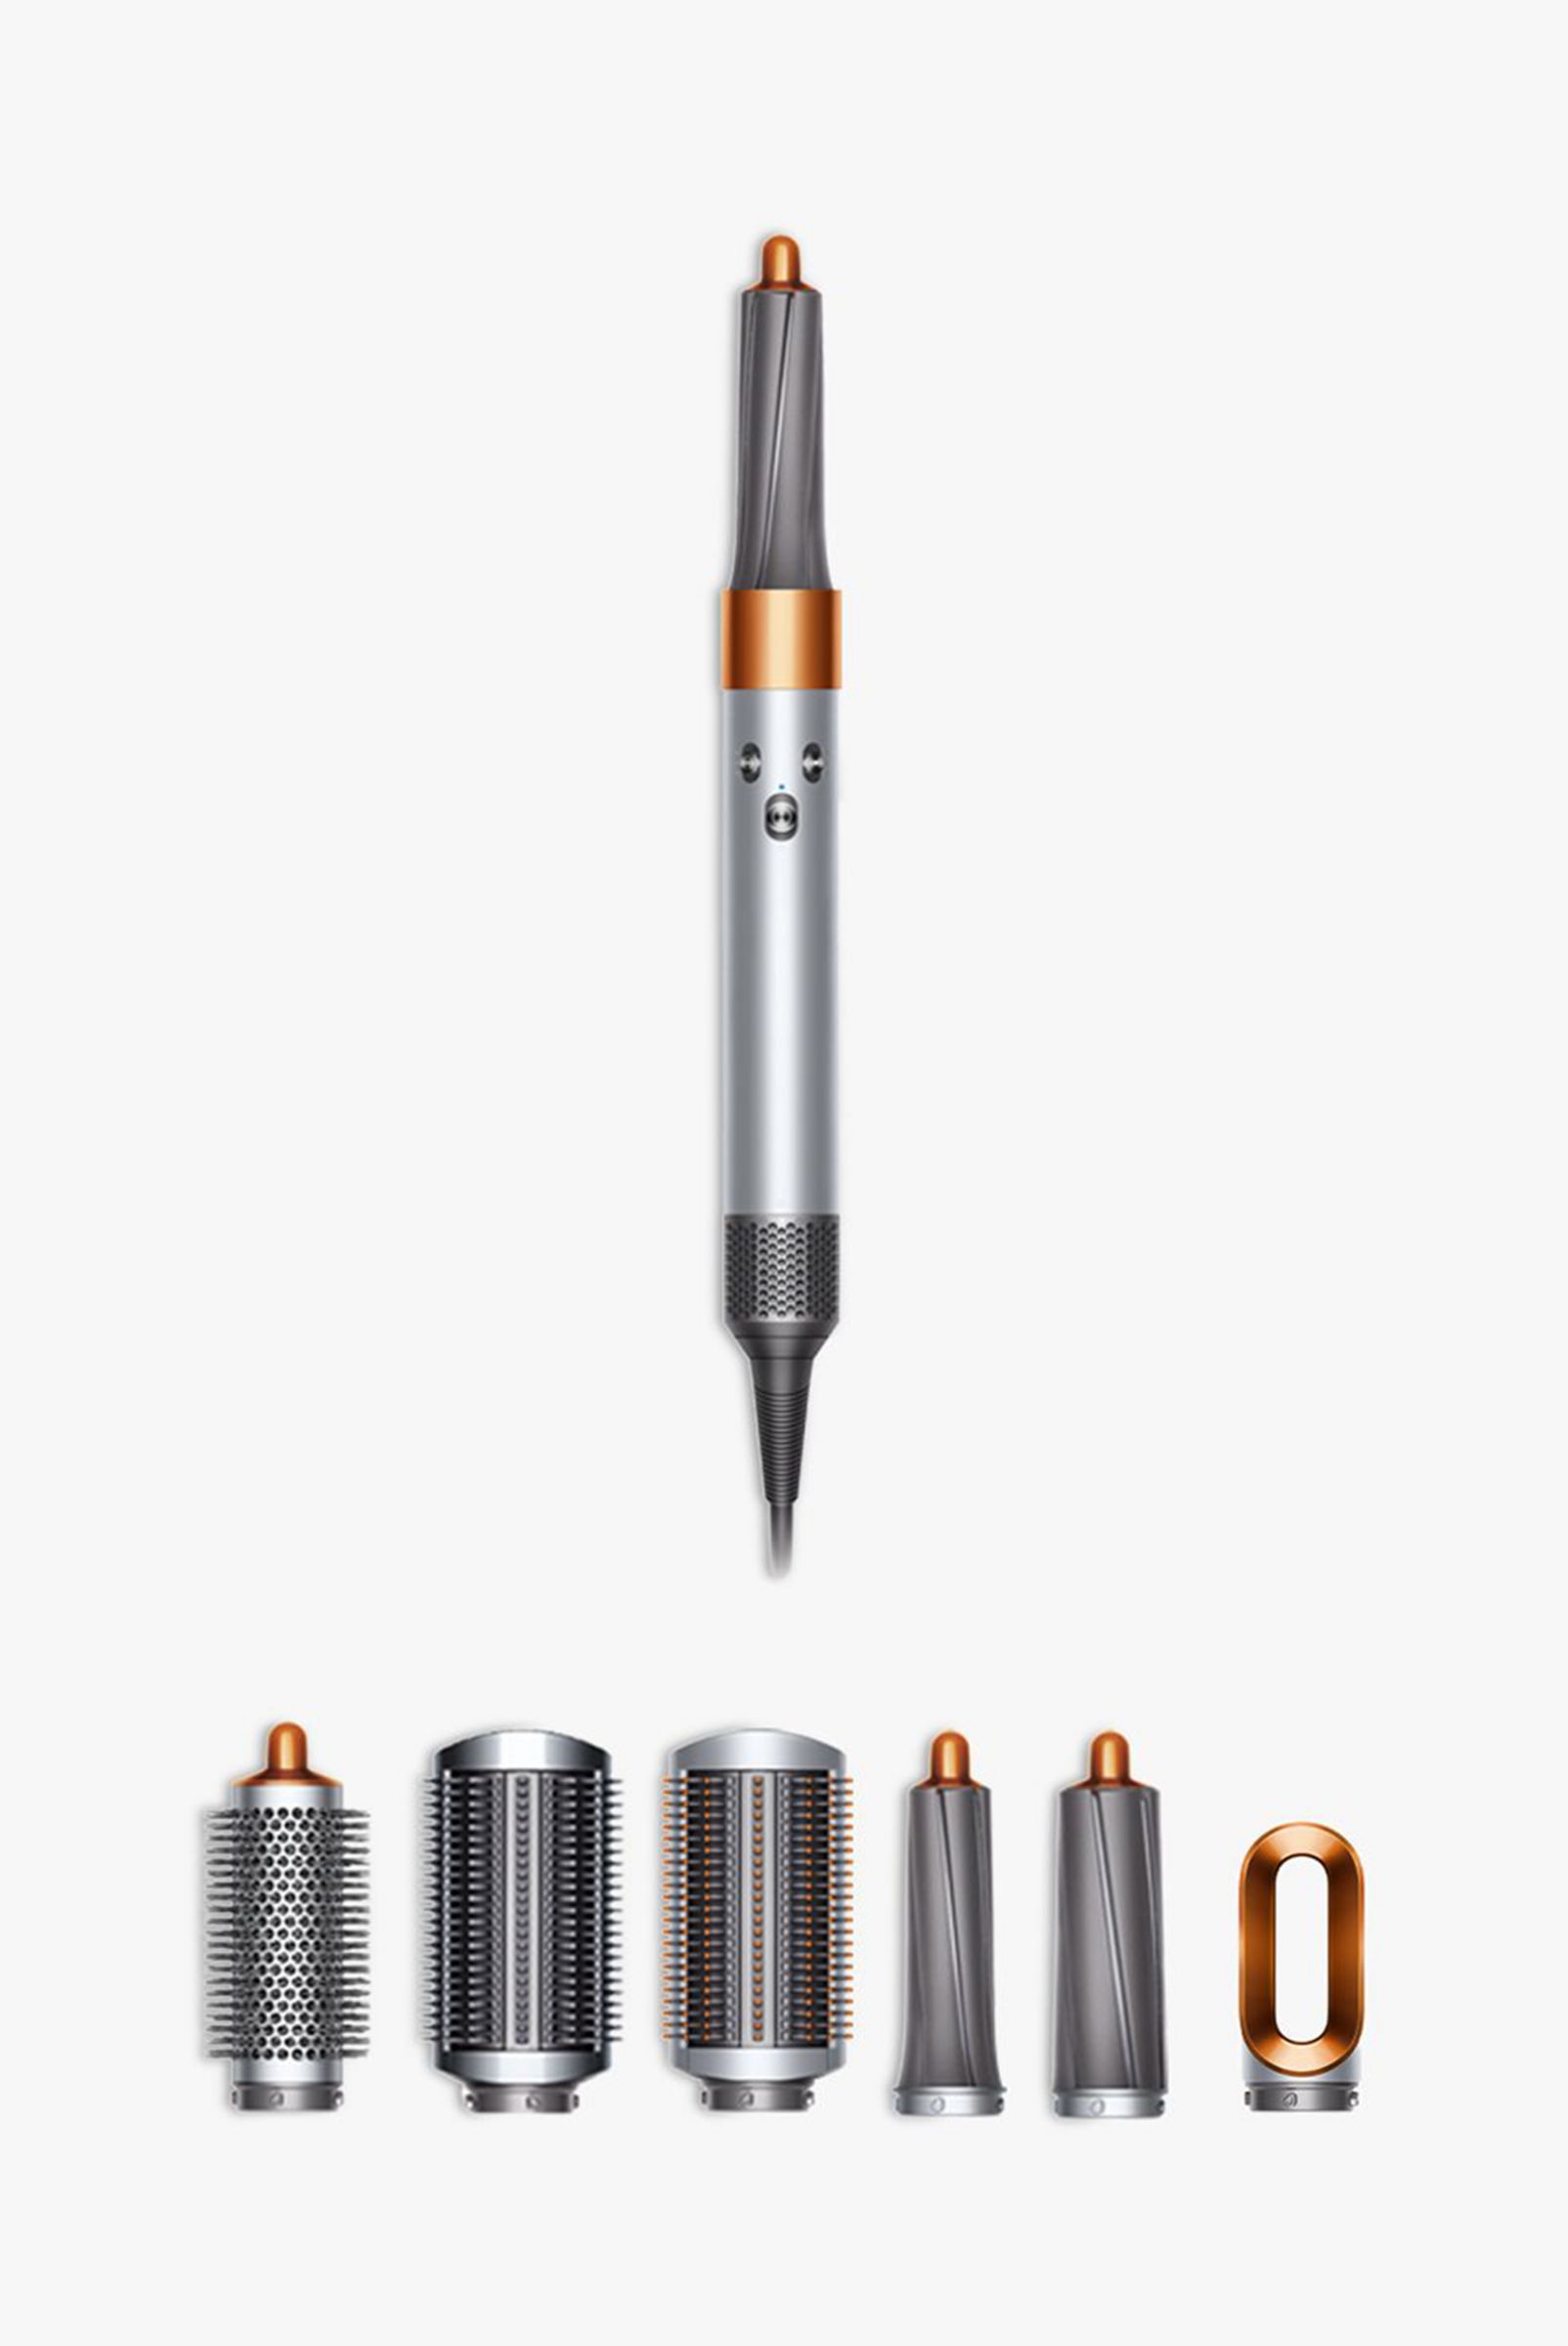 Dyson Airwrap™ Styler Complete Exclusive Copper Gift Edition with Travel Bag & Case, £449.99